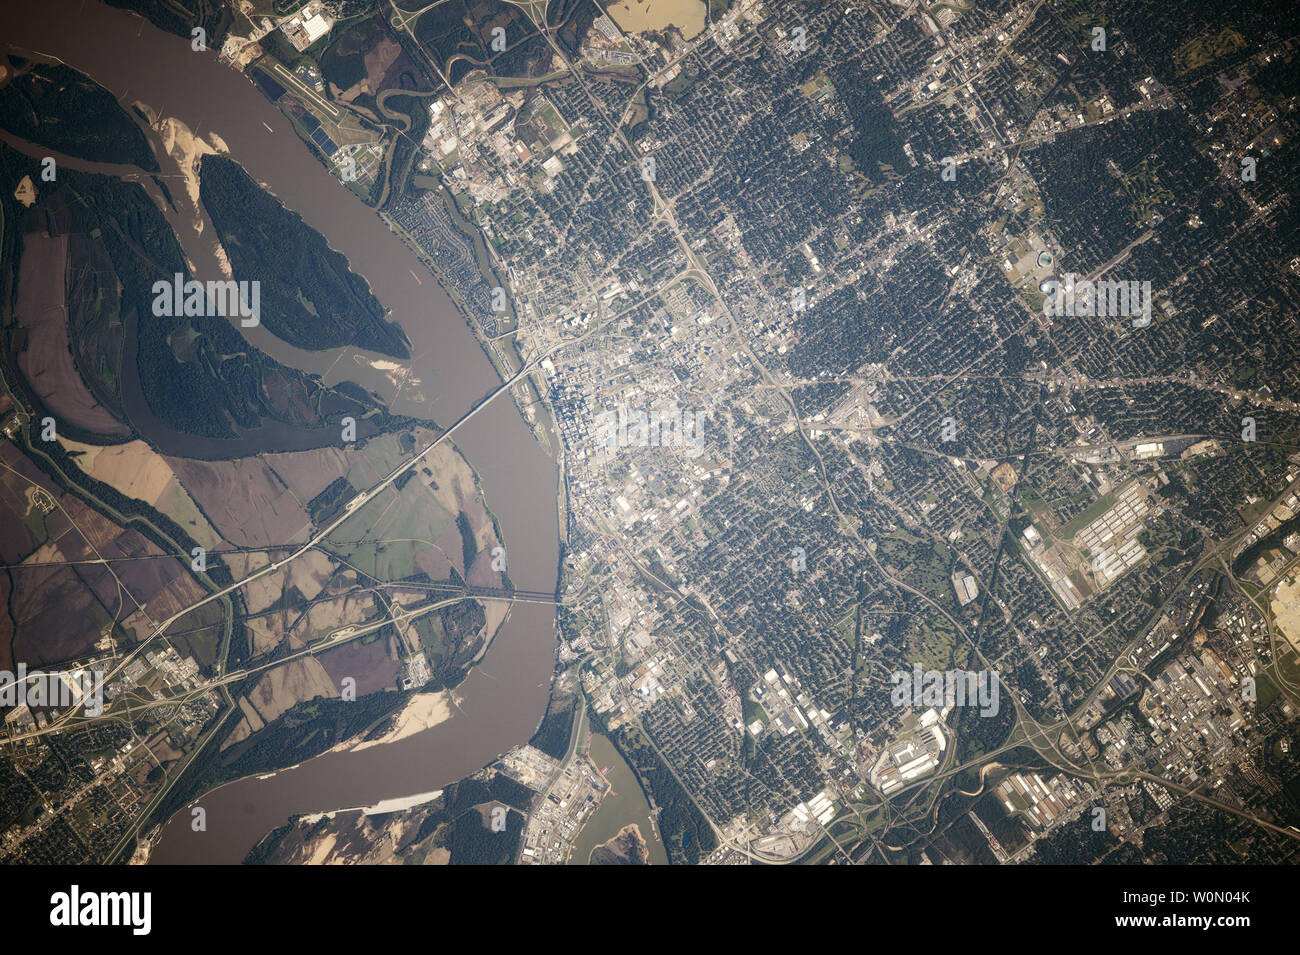 Astronauts aboard the International Space Station took this photograph of Memphis, Tennessee, also known as 'Bluff City' because of its location on high bluffs above the flood levels of the Mississippi River, on October 30, 2014. The city center sits next to the mud-brown Mississippi. Surrounding suburbs are green and have a distinctly darker tone. Major roads radiate from the city center, cutting the cityÕs street grid pattern. The runway of a local airport appears next to the river (top left). The low country opposite the city center is dominated by farms and the broad sweep of ancient meand Stock Photo